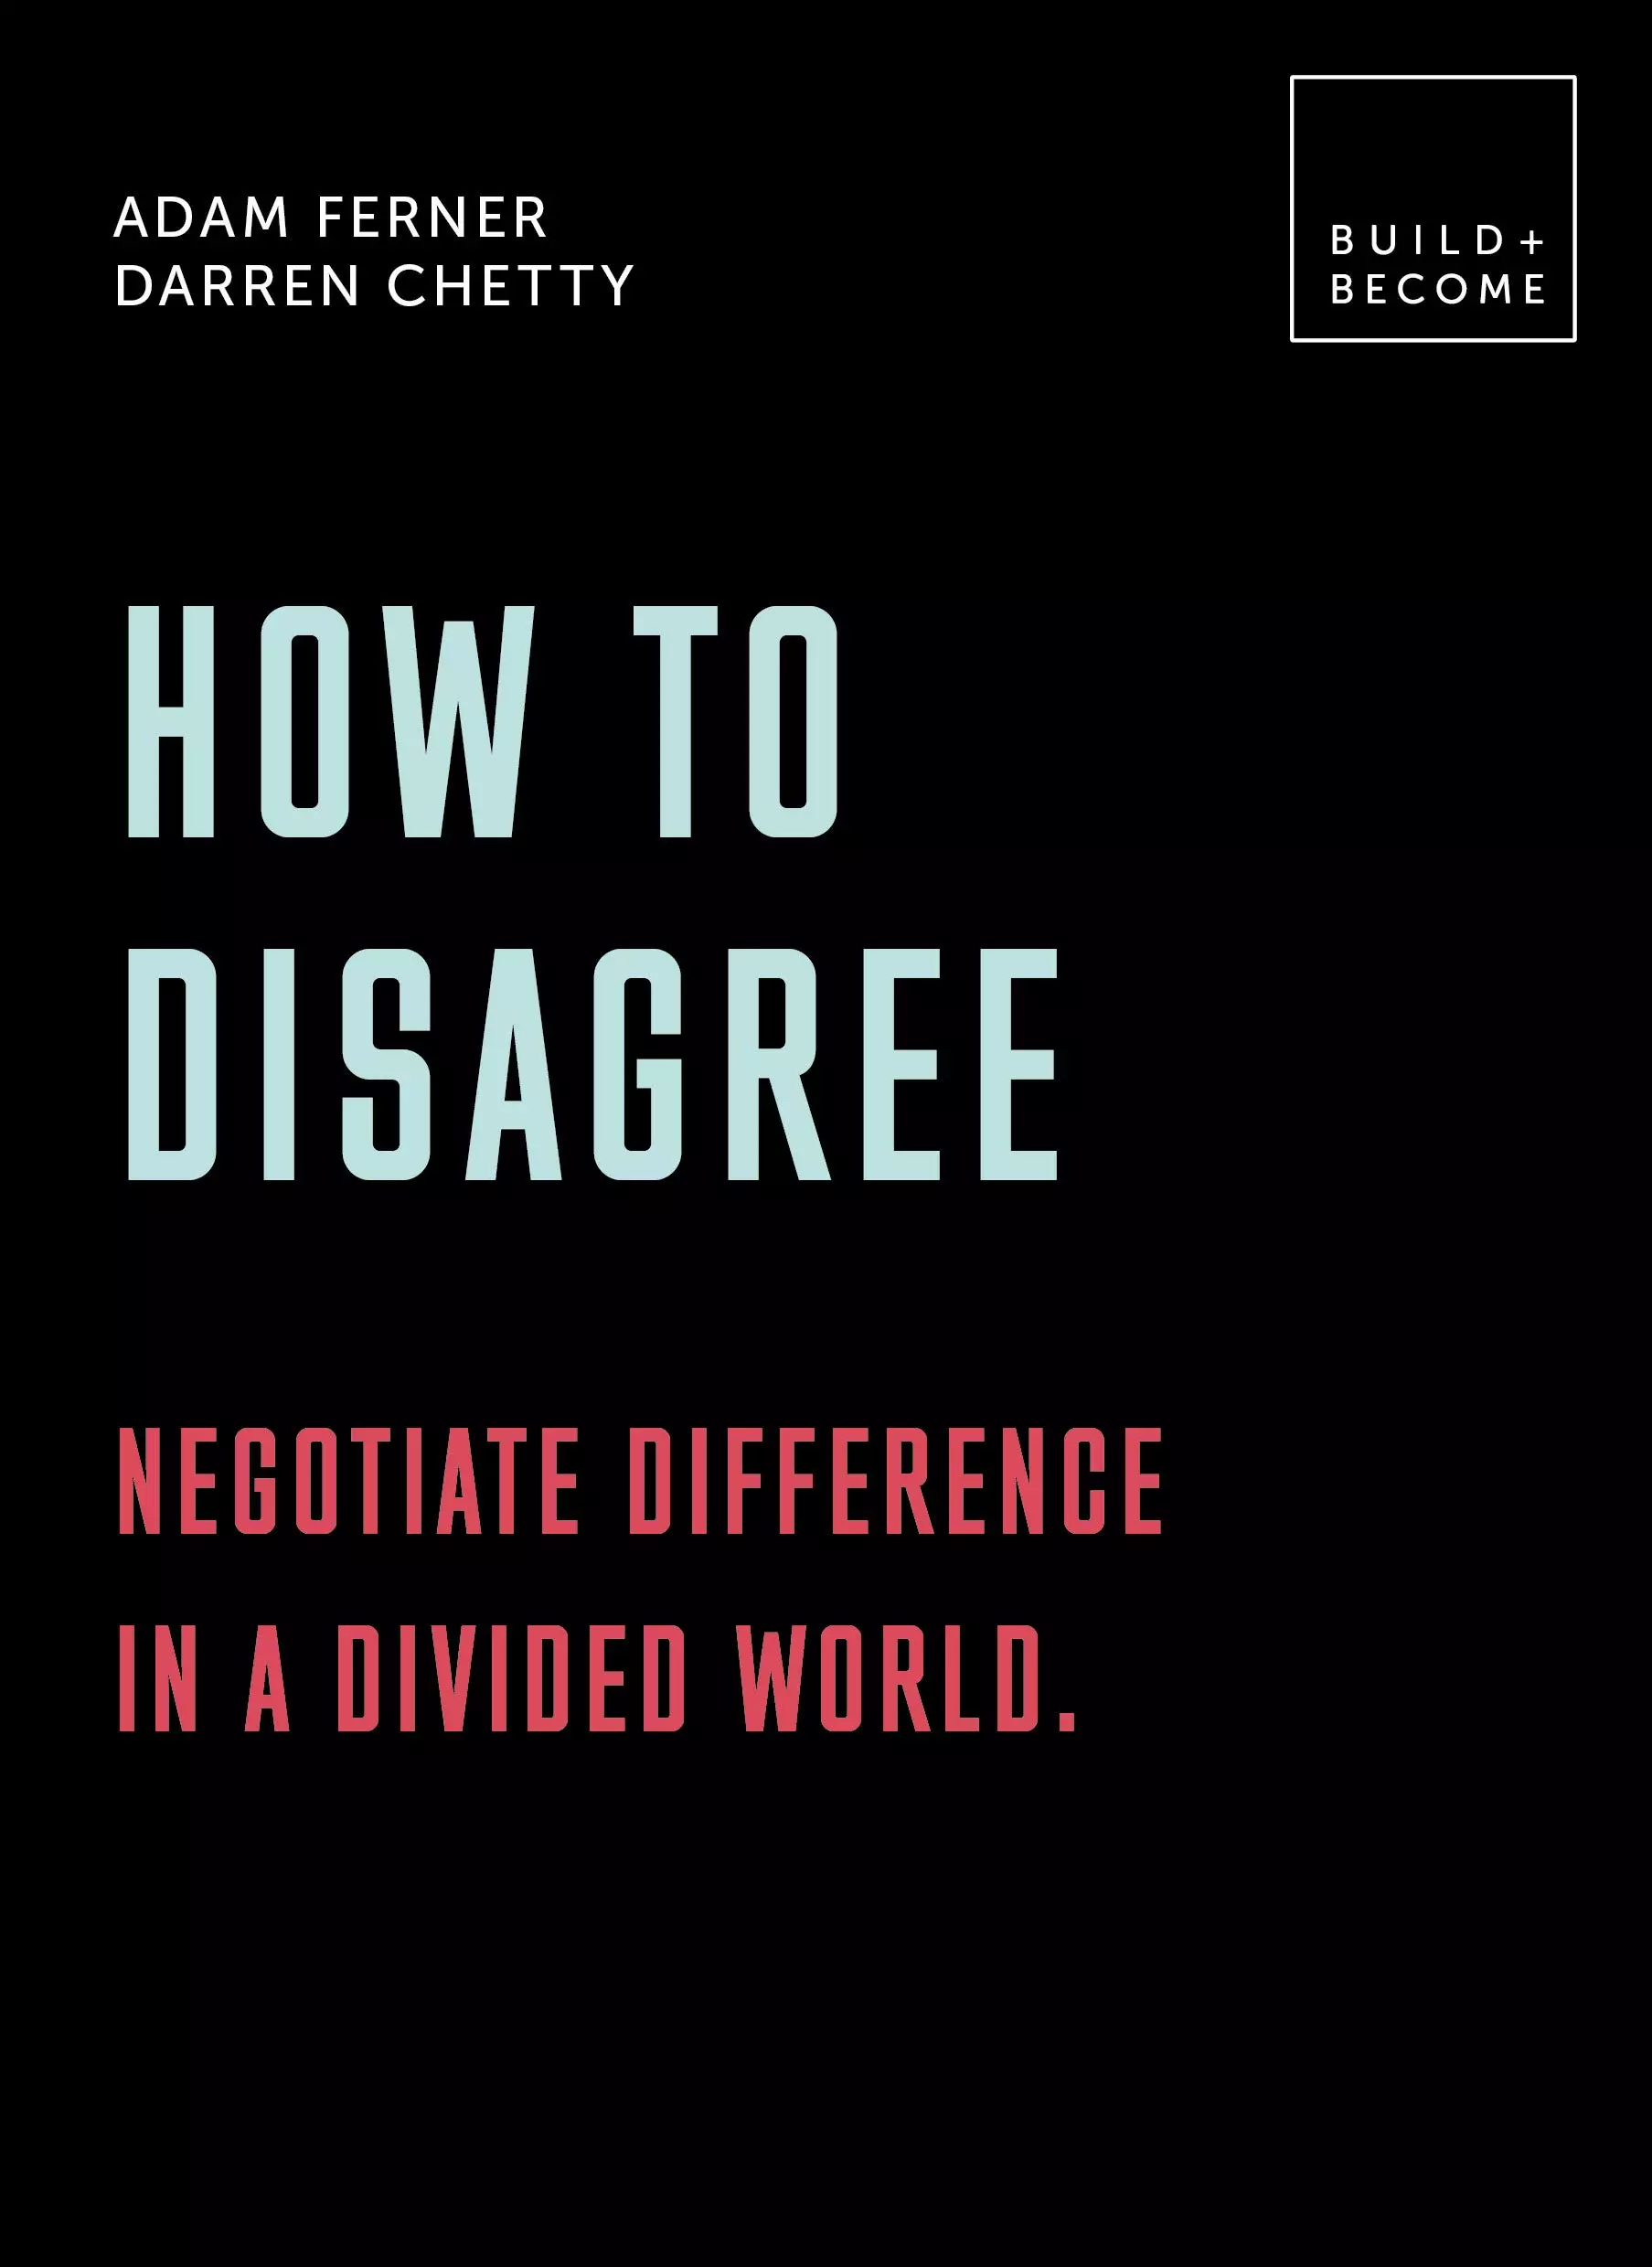 How to Disagree: Negotiate Difference in a Divided World by Adam Ferner & Darren Chetty